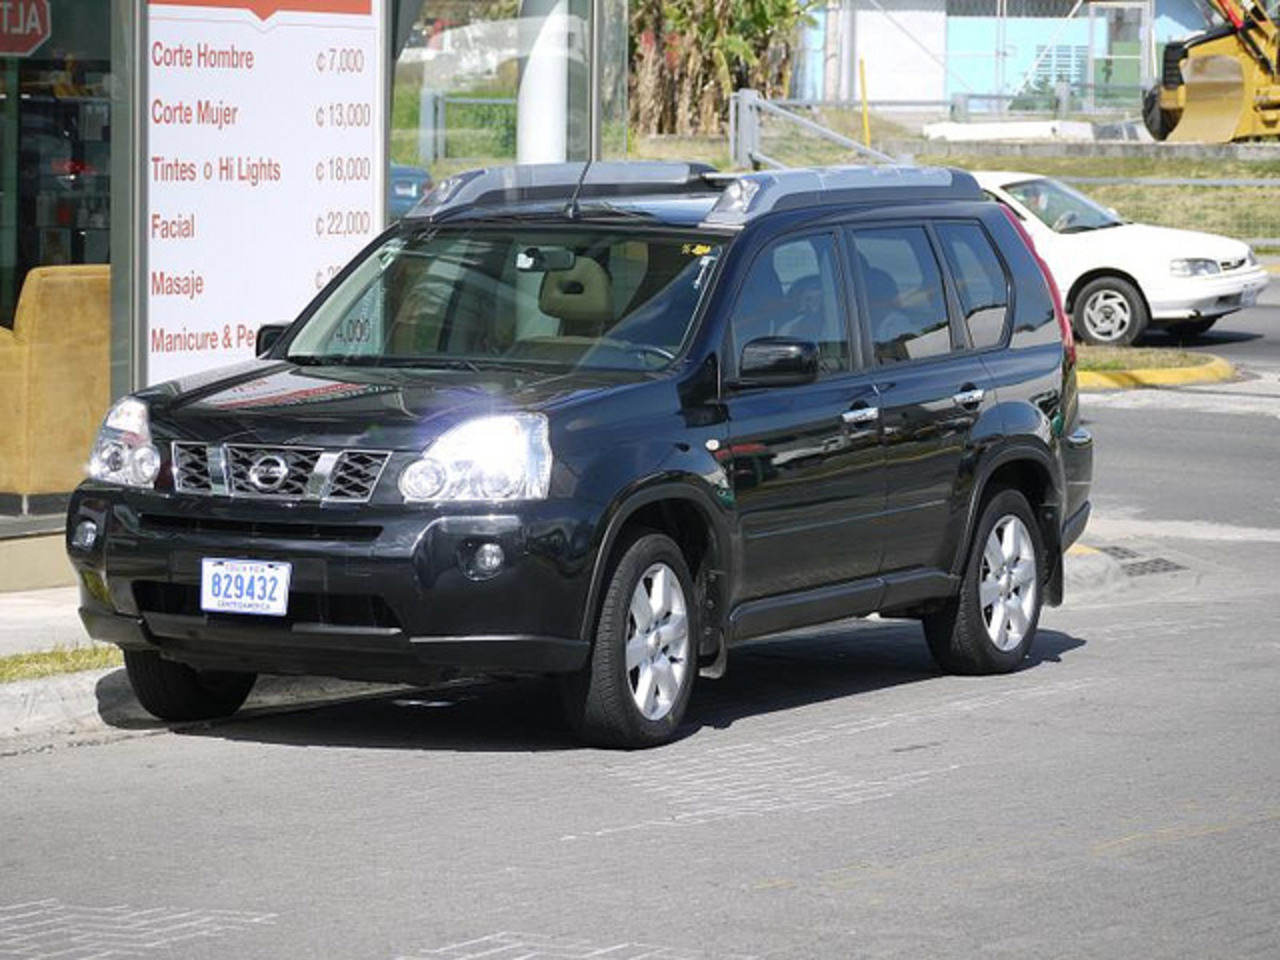 Nissan X-trail LE 2010 Black | Flickr - Photo Sharing!